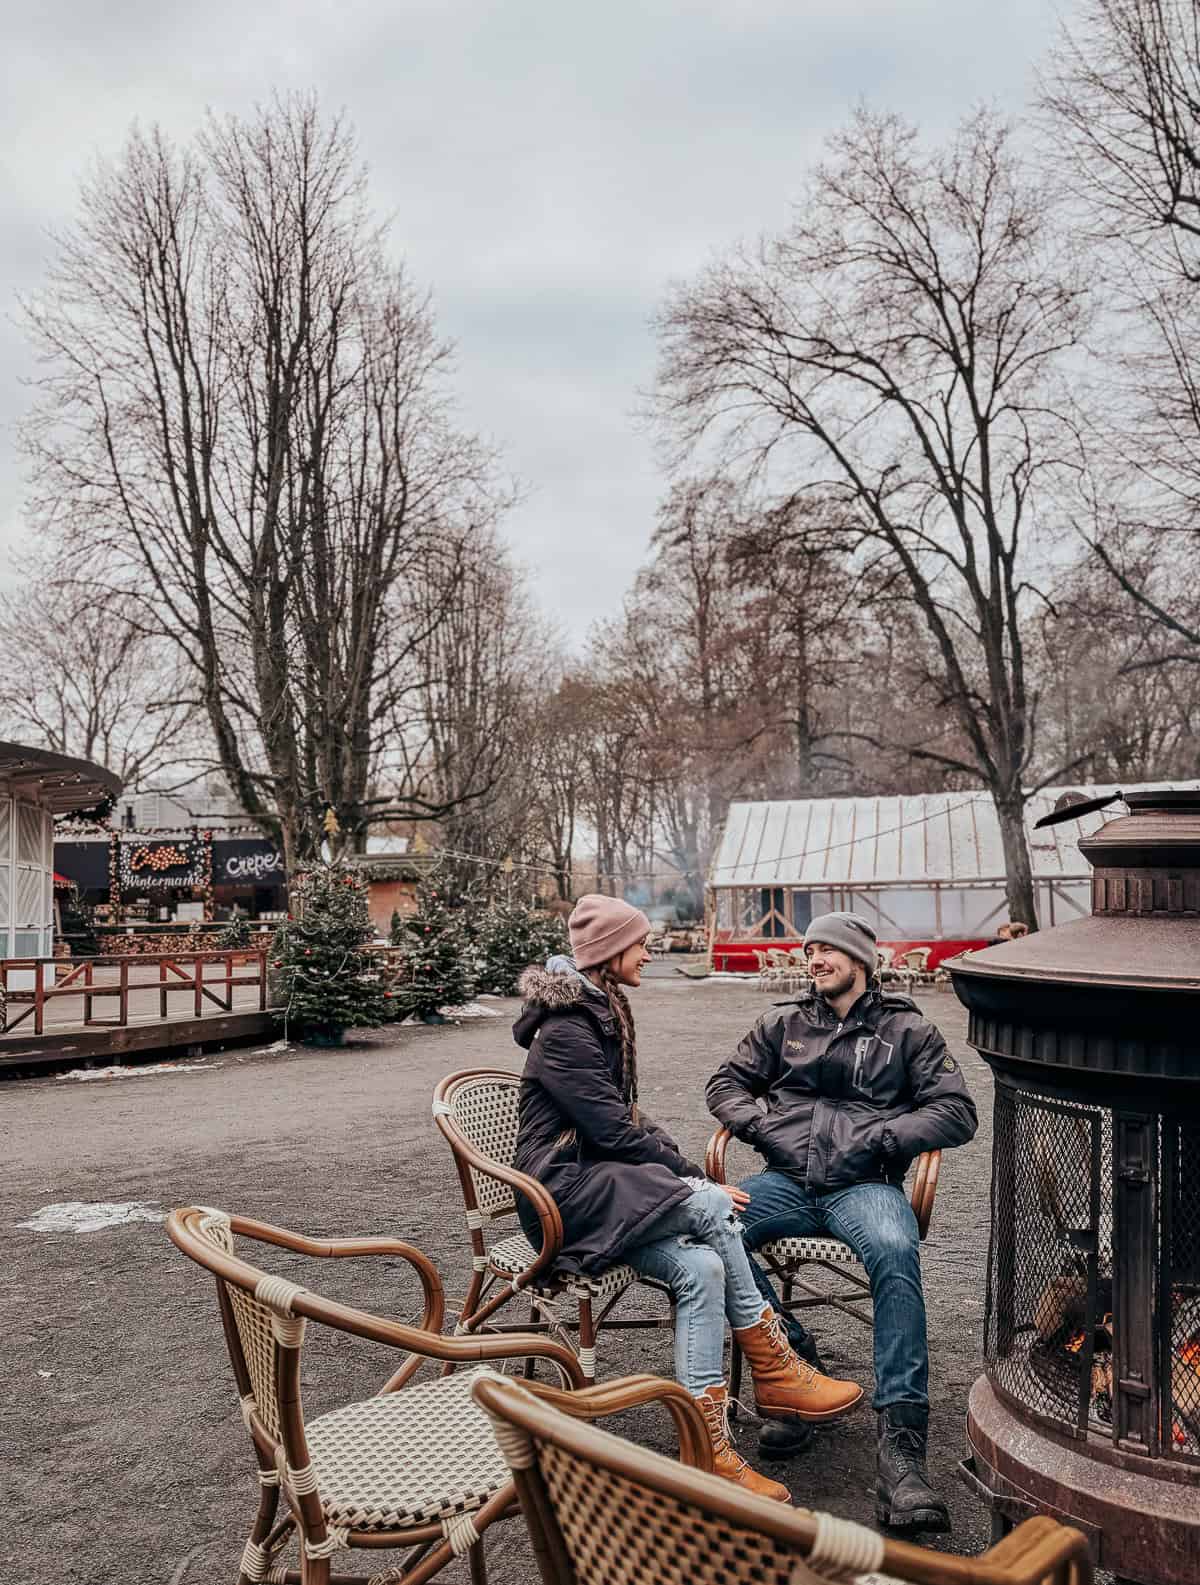 A cozy outdoor seating area with people warmly dressed, chatting near a lit stove. The setting is informal with rustic wooden chairs and festive decorations, nestled in a winter park.